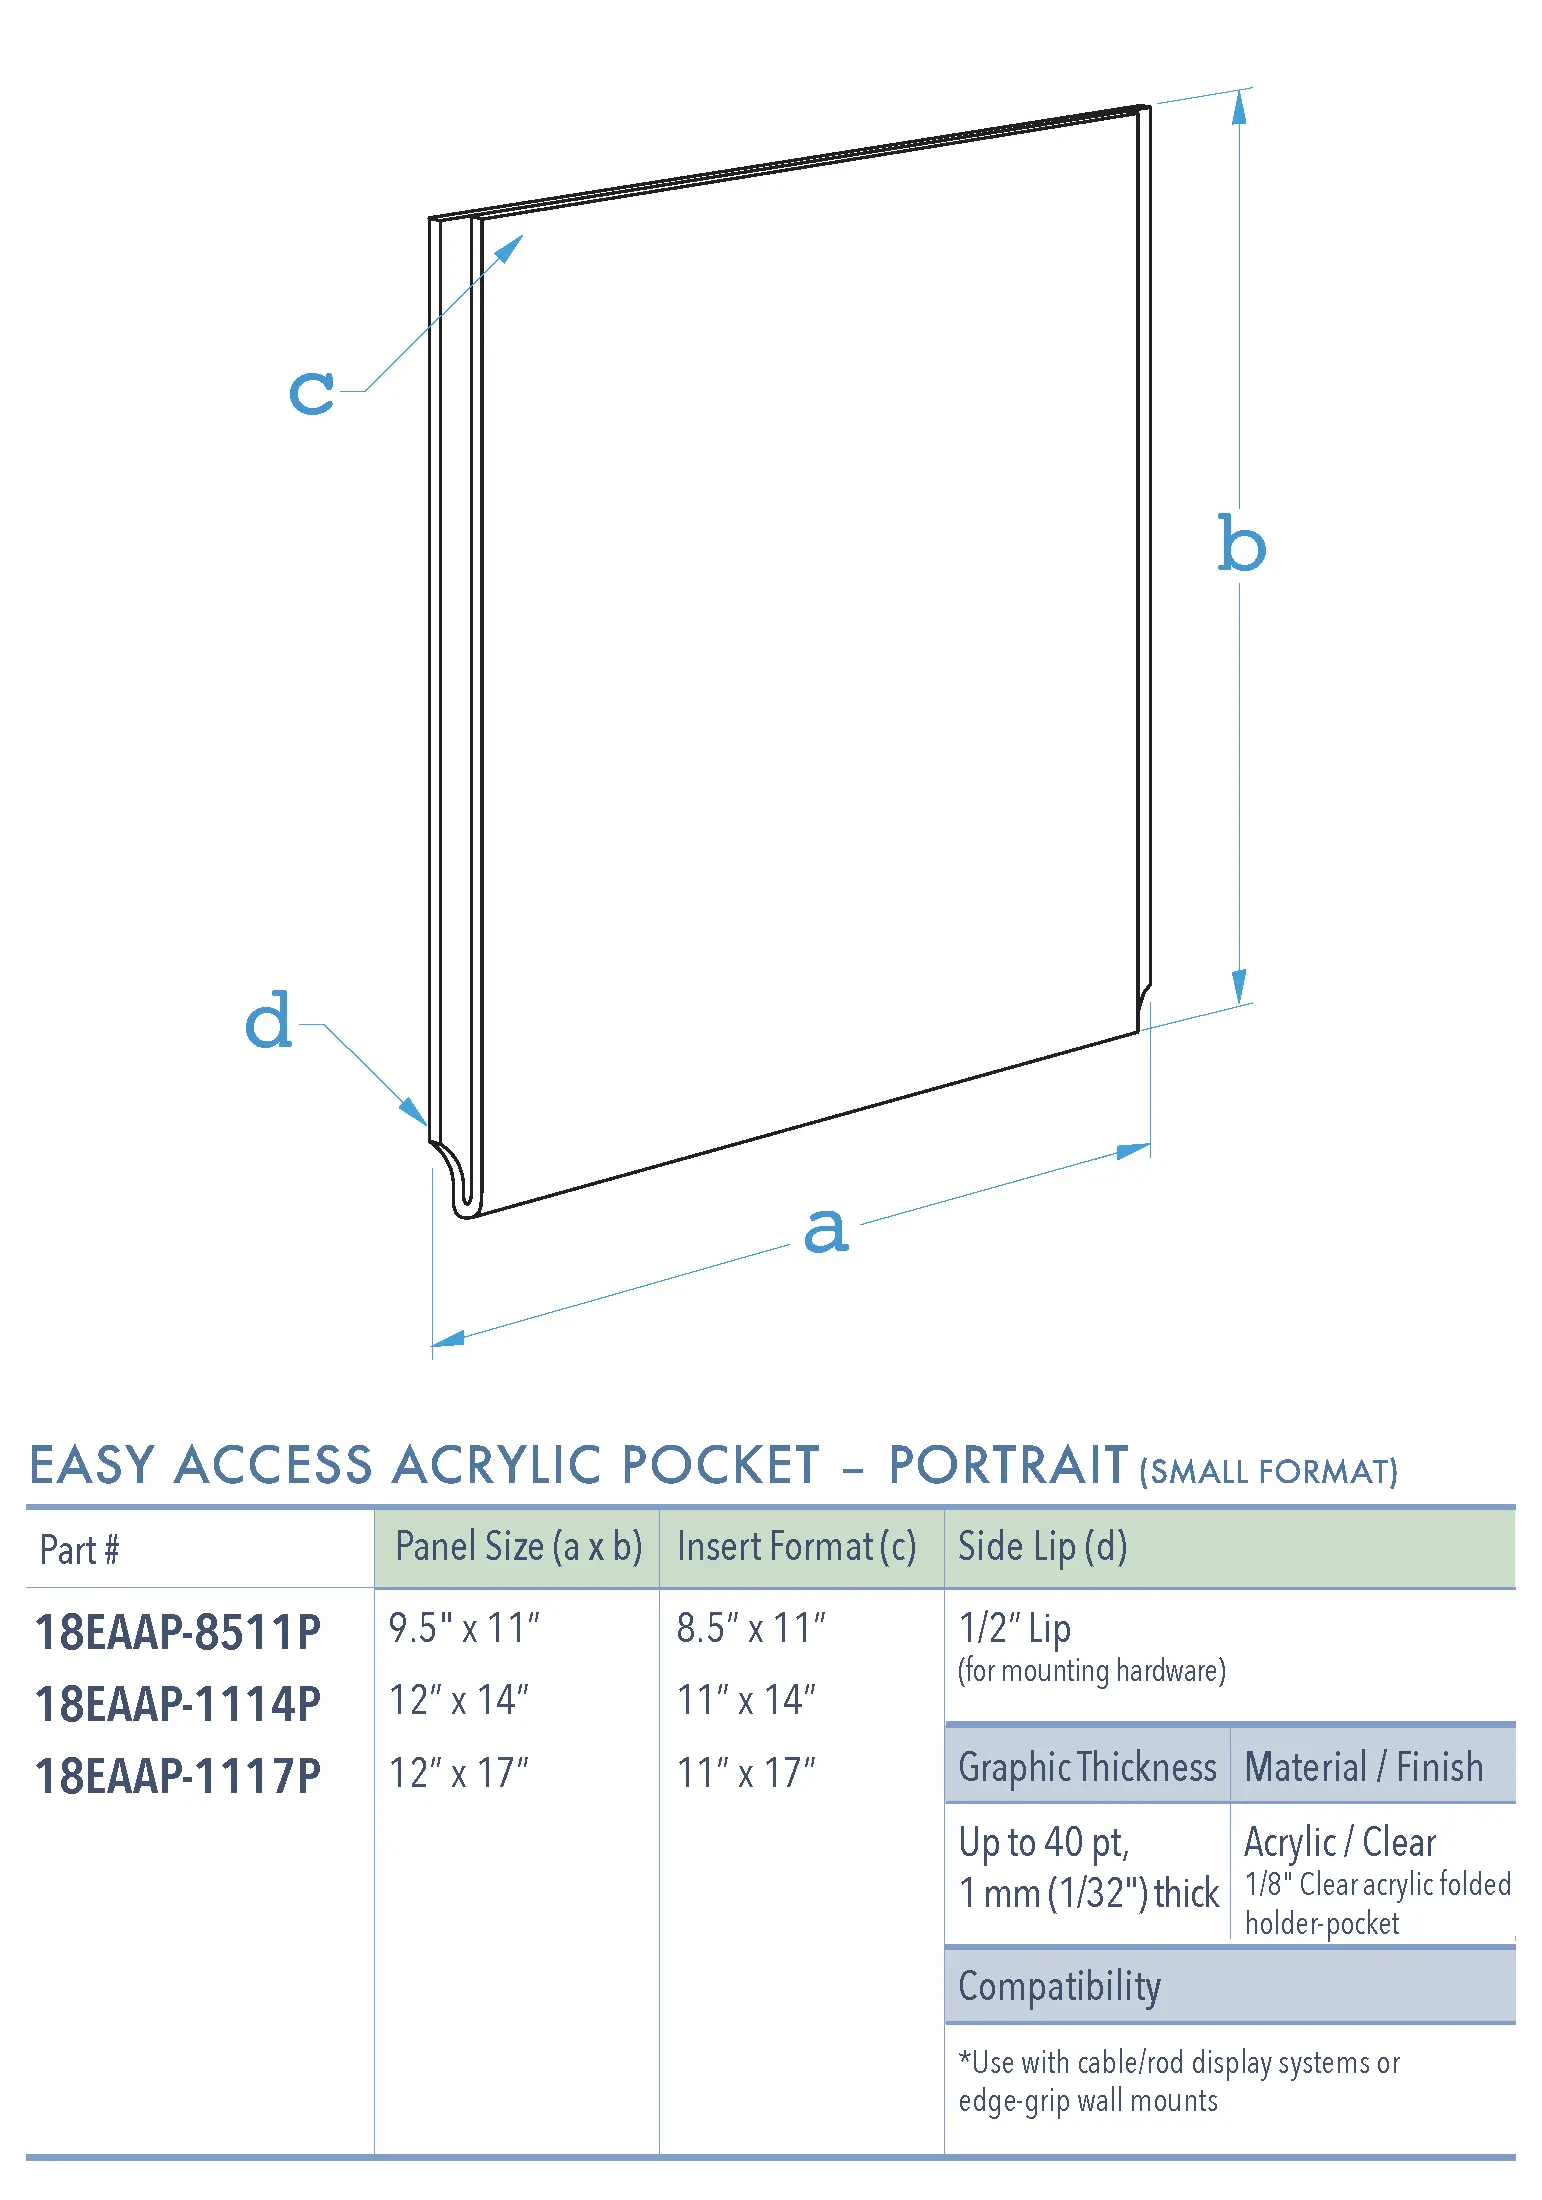 Specifications for 18EAAP-INSERT-PORTRAIT-SM